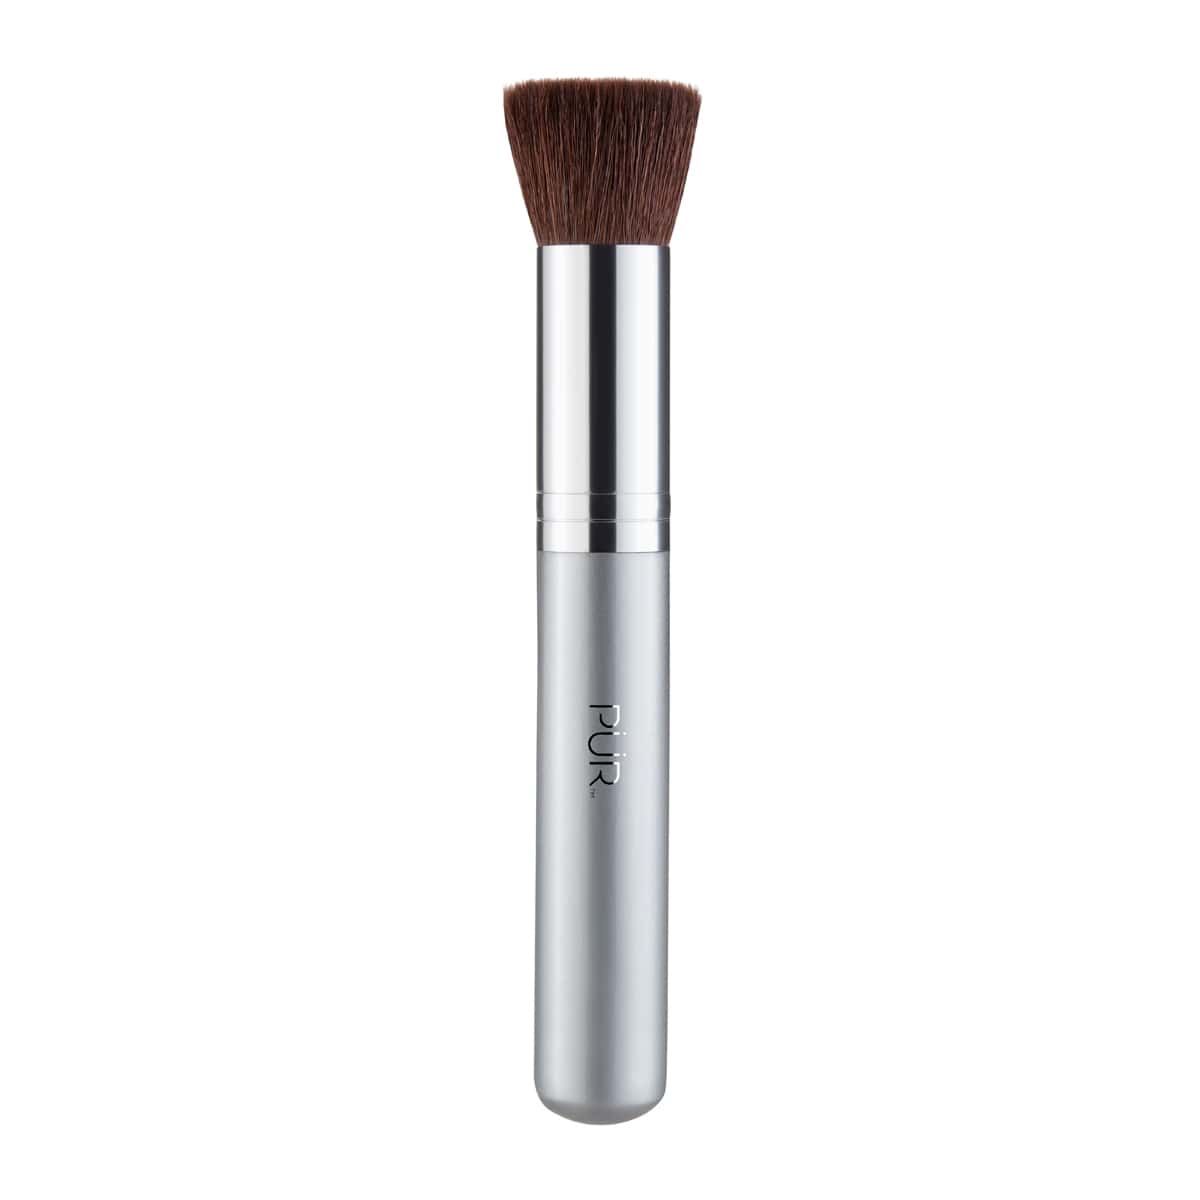 Chisel Brush | PUR, COSMEDIX, and butter London